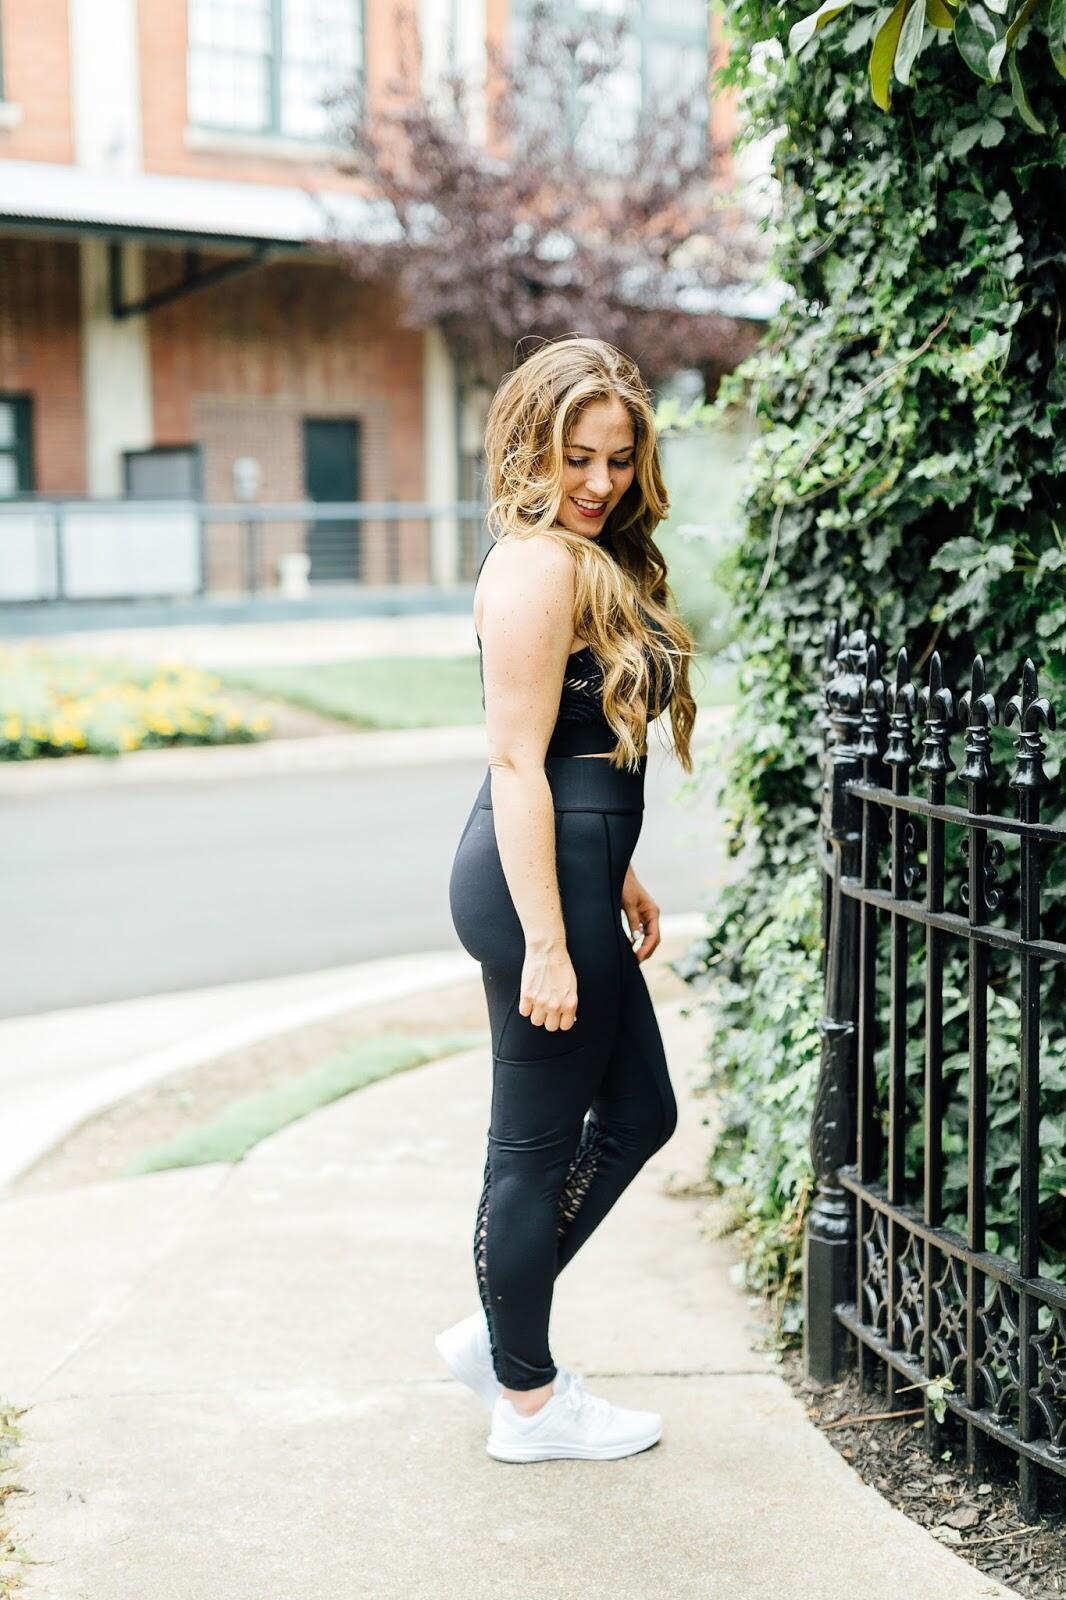 The Best Cardio Workout I Love Right Now - Tabata Training by popular blogger Walking in Memphis in High Heels